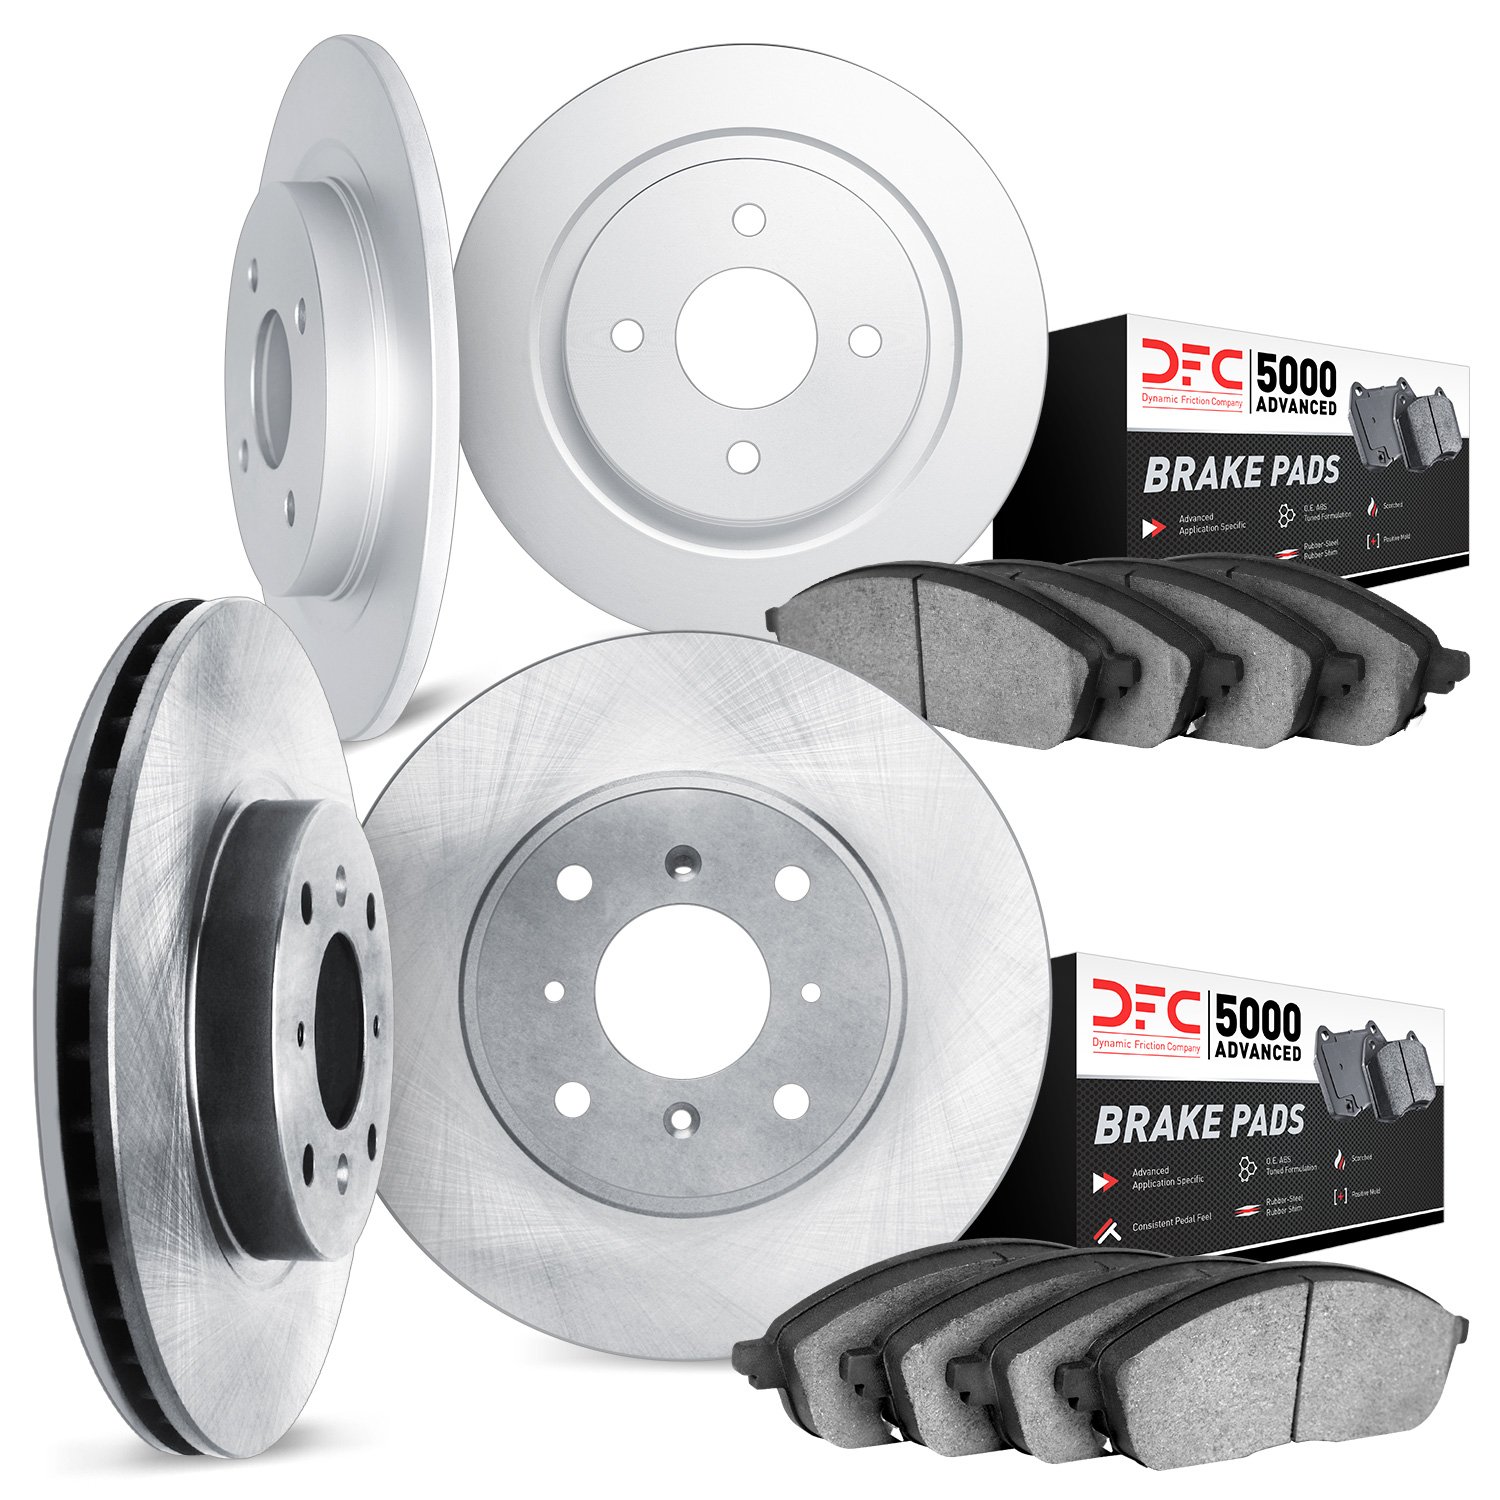 6504-72095 Brake Rotors w/5000 Advanced Brake Pads Kit, 1989-1990 Multiple Makes/Models, Position: Front and Rear